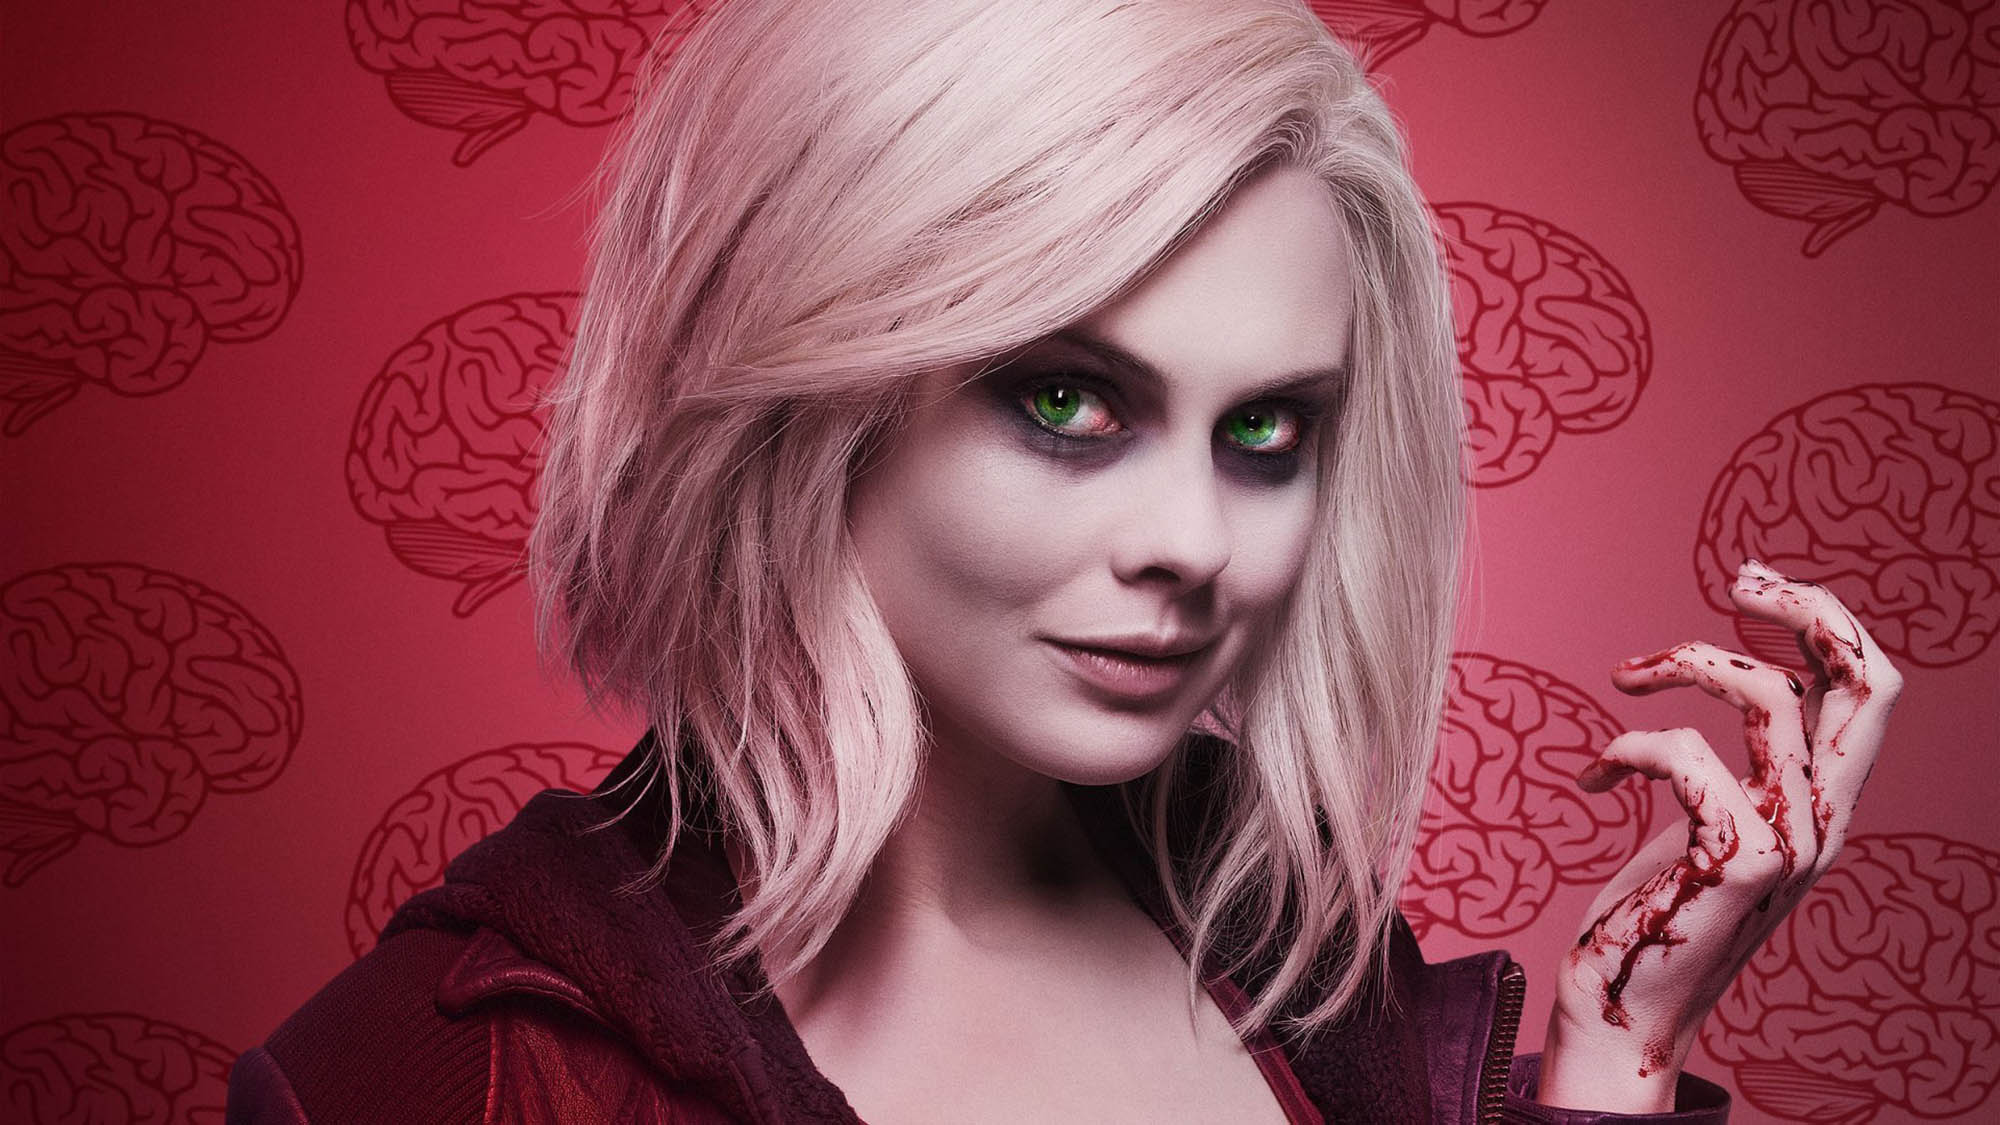 'iZombie' is a fun time. Check out our breakdown of the best brain eating moments on the show.